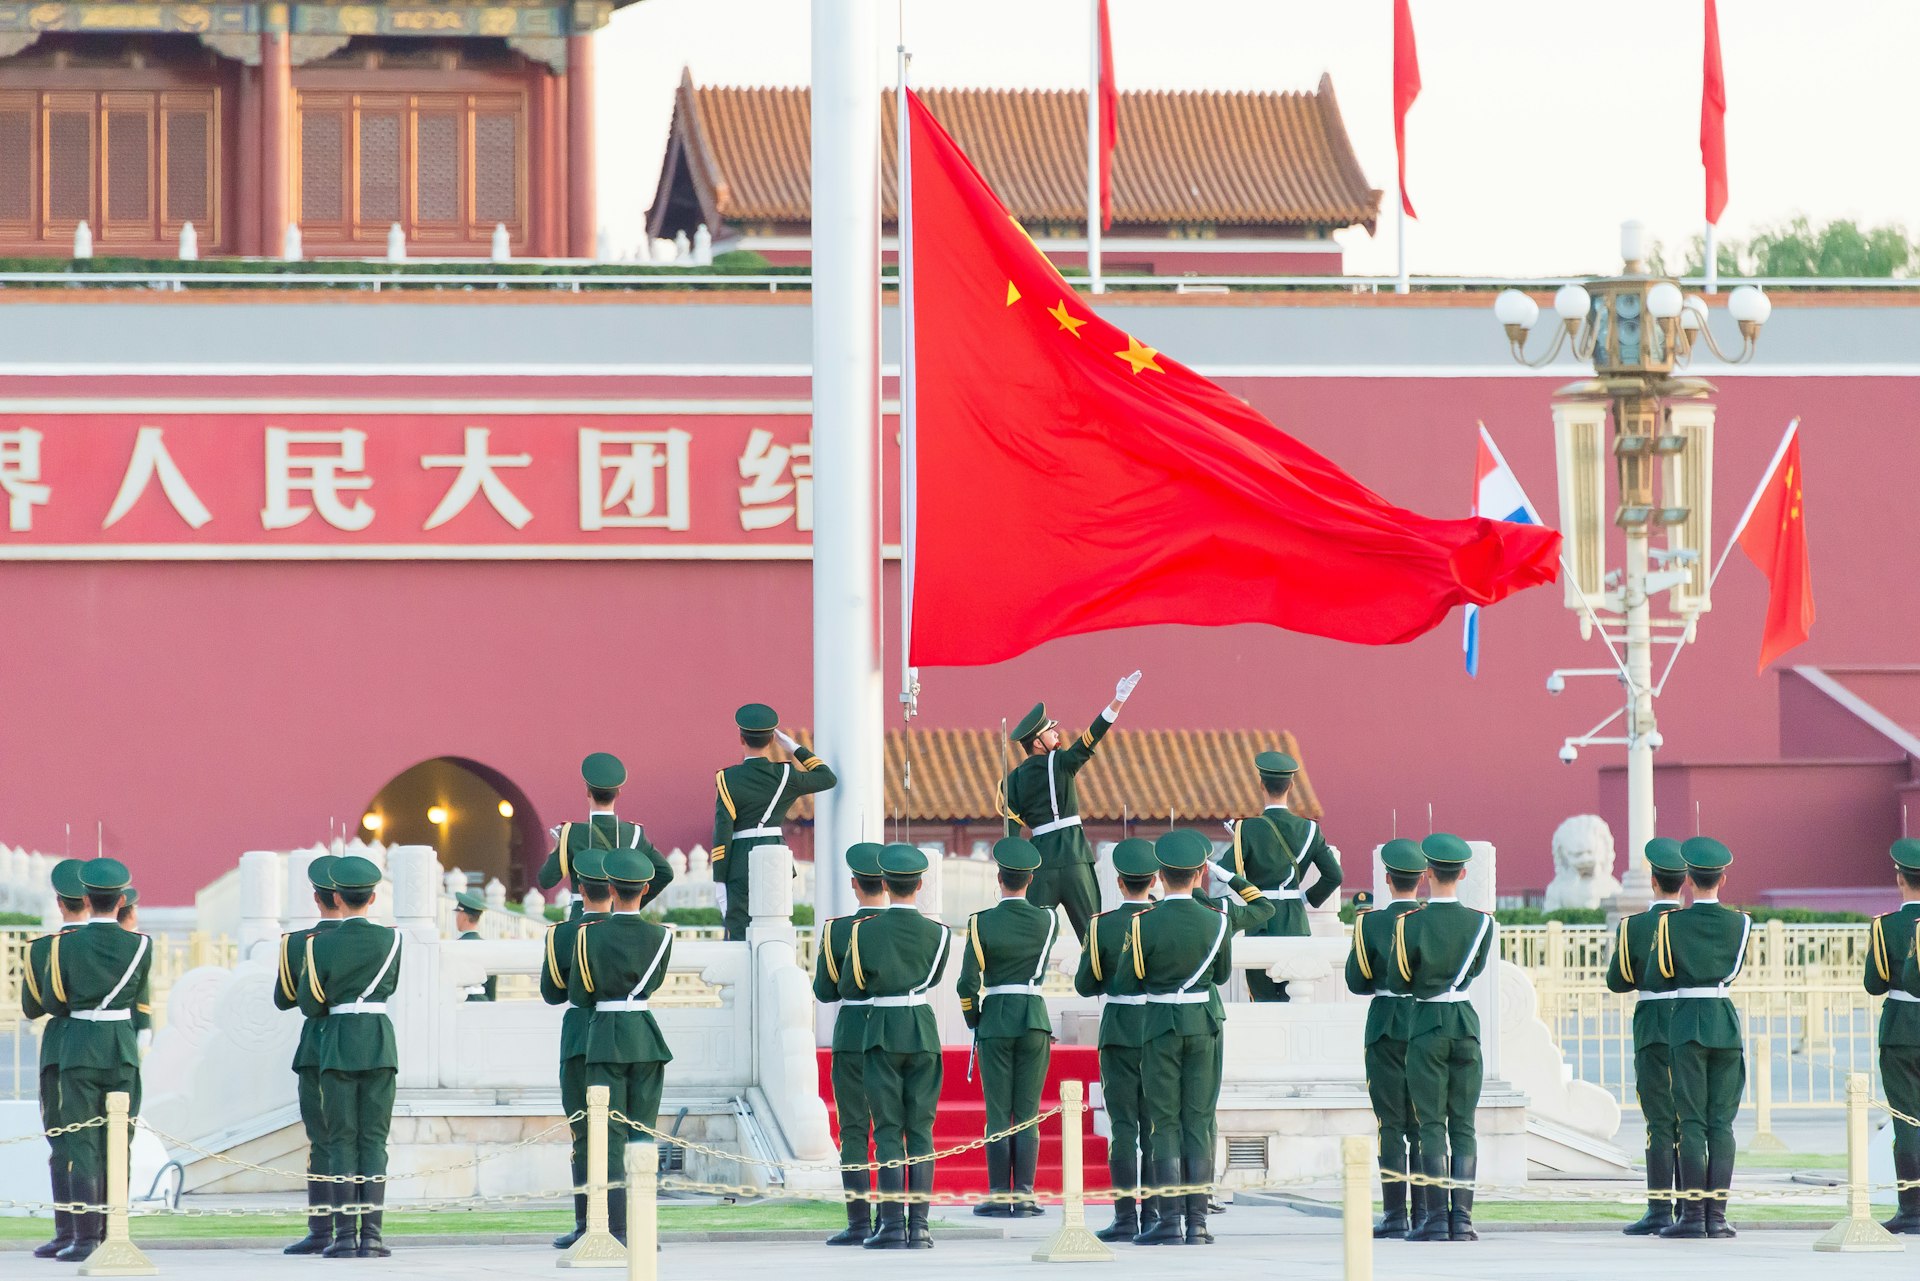 Troops raise the Chinese flag in Tian’anmen Square, Beijing, China